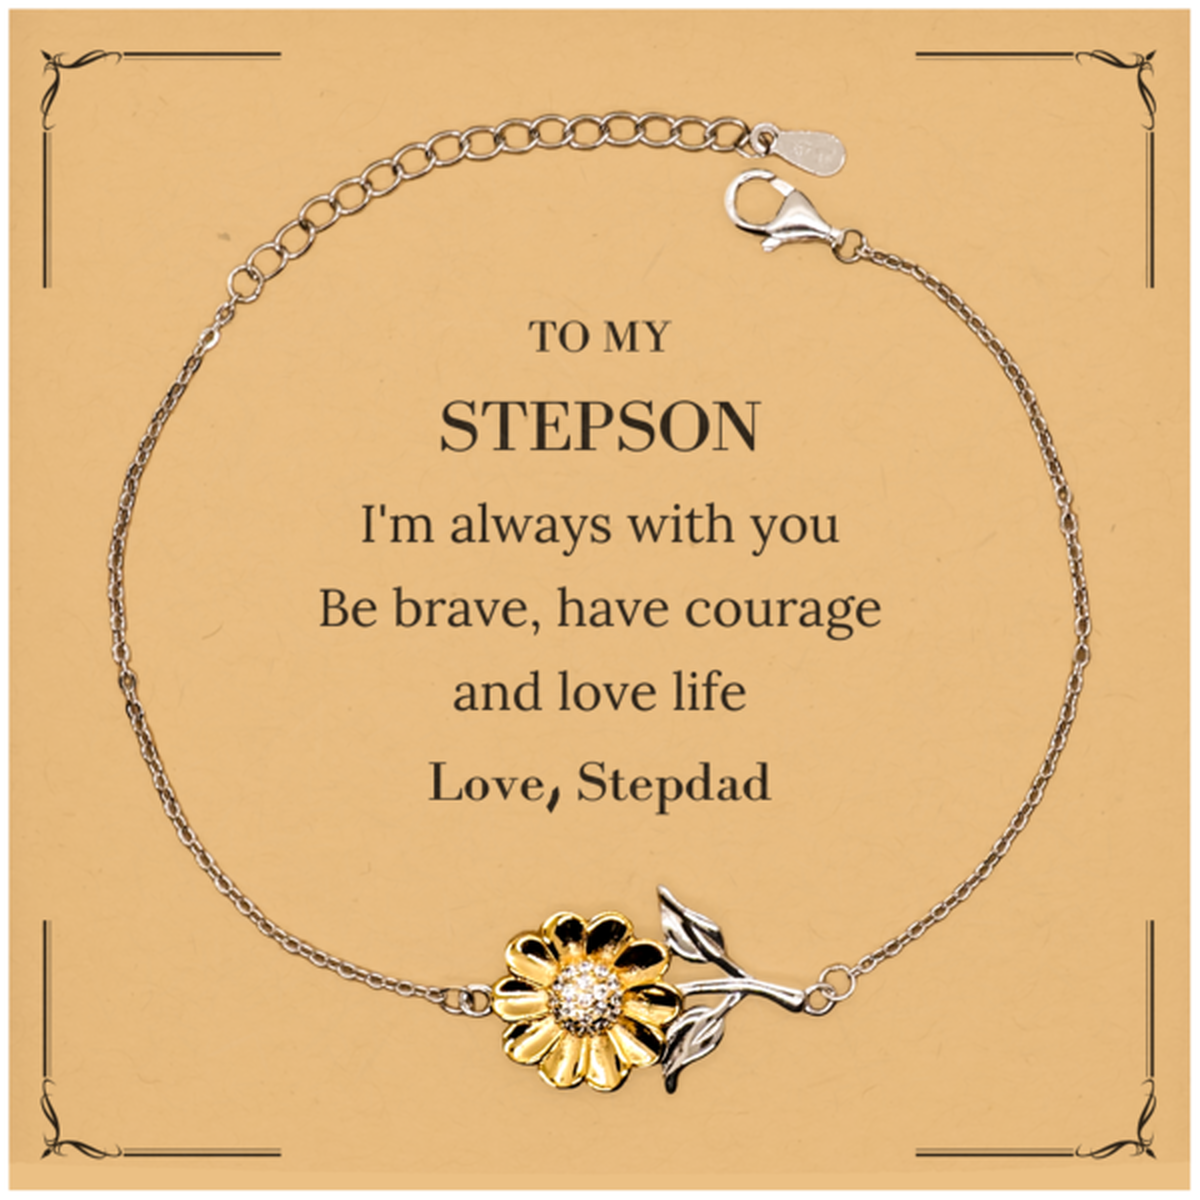 To My Stepson Gifts from Stepdad, Unique Sunflower Bracelet Inspirational Christmas Birthday Graduation Gifts for Stepson I'm always with you. Be brave, have courage and love life. Love, Stepdad